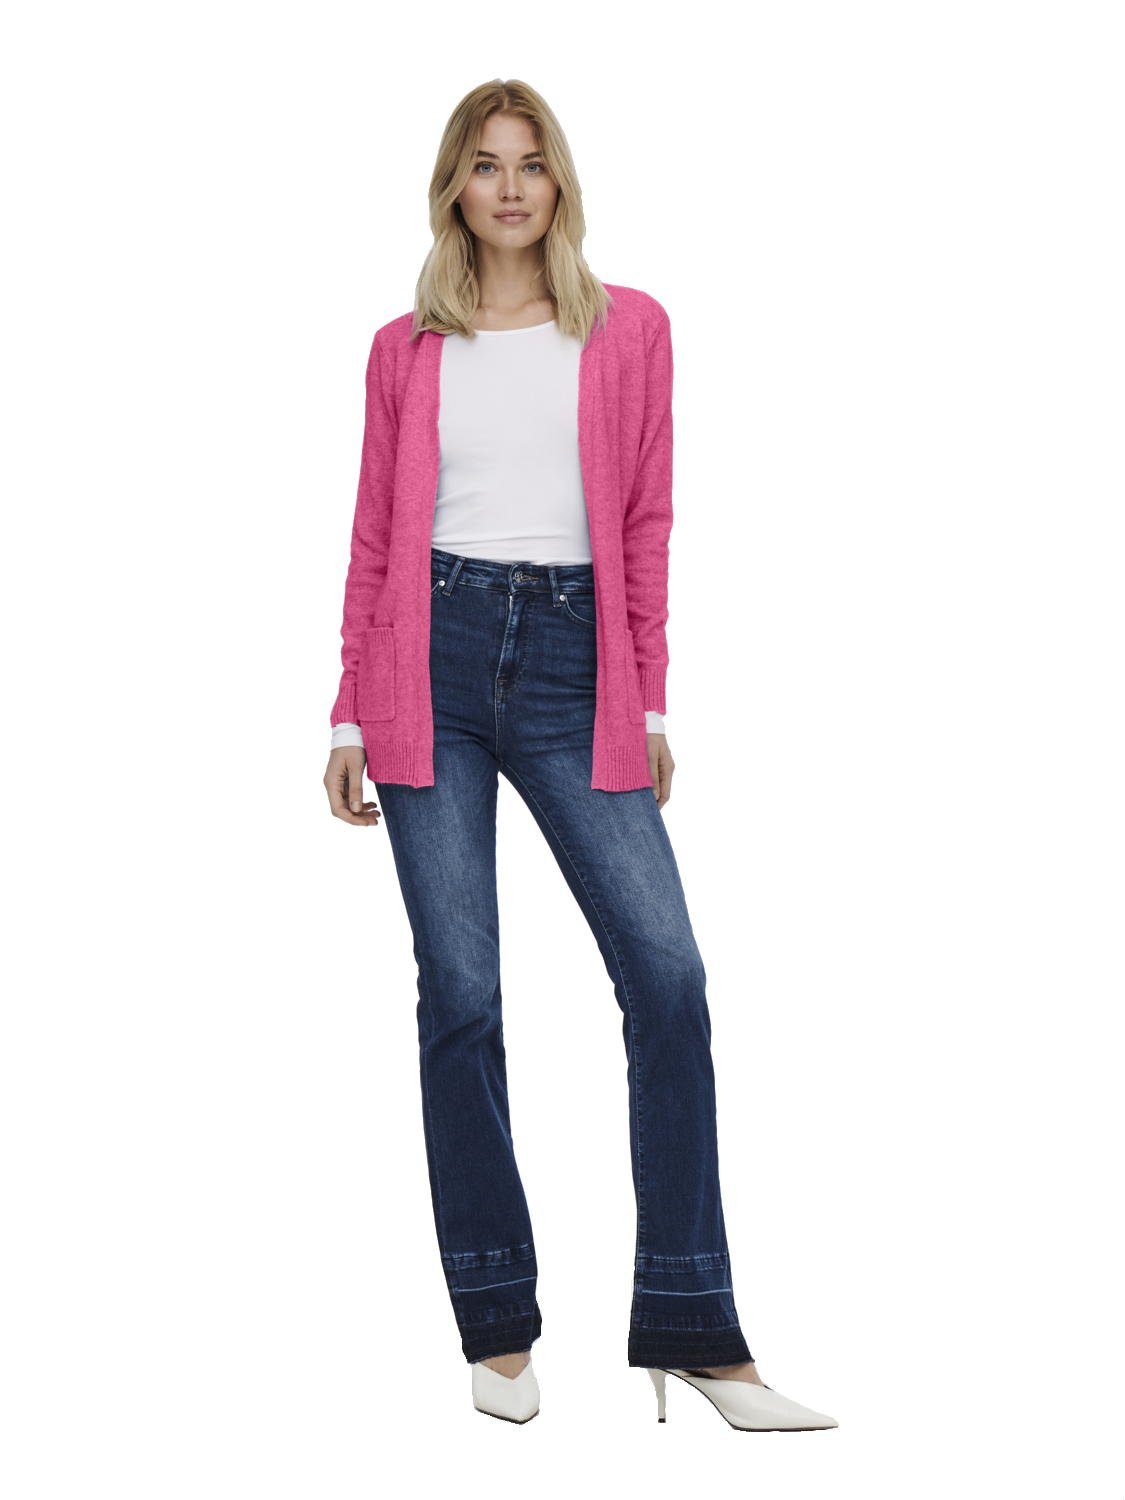 offen OnlLesly - Cardigan Strick-Jacke Damen female ONLY Knt Cardigan Pink Only Open